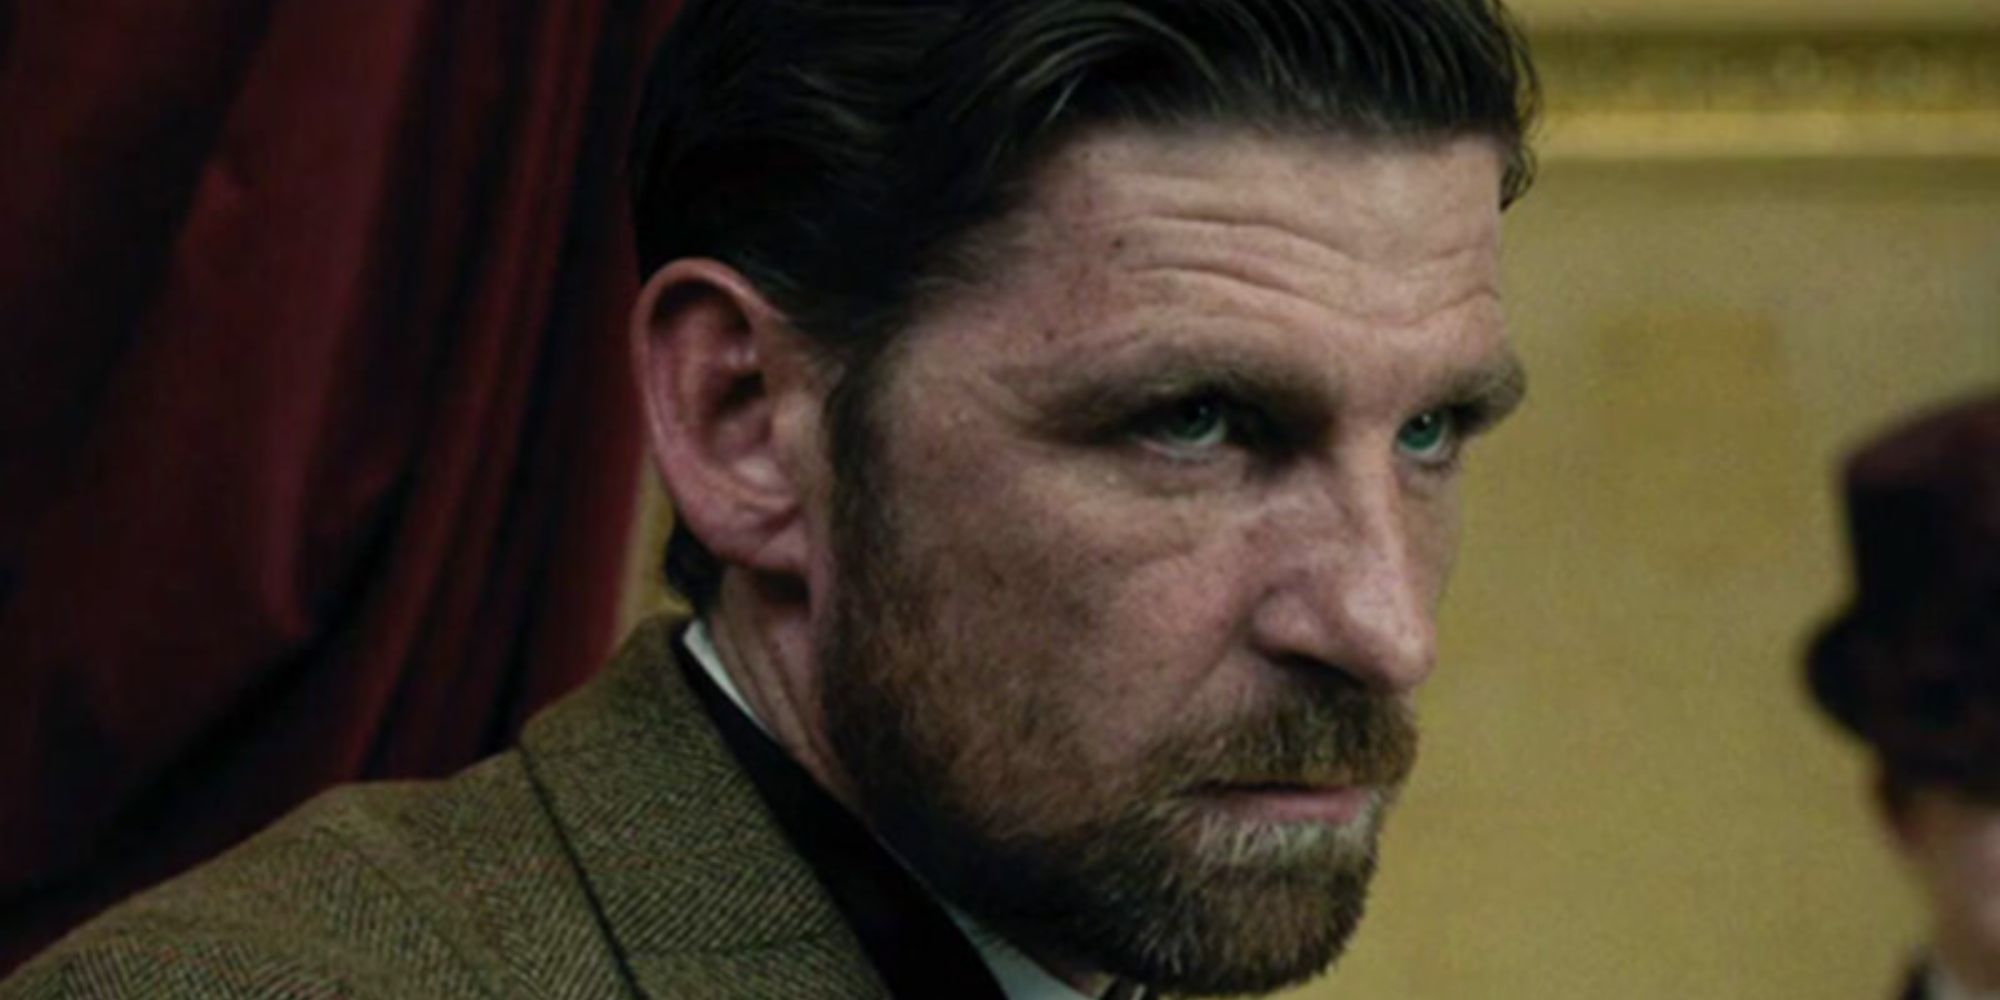 From 'Sherlock Holmes: A Game of Shadows' (2011): Colonel Moran played by Paul Anderson